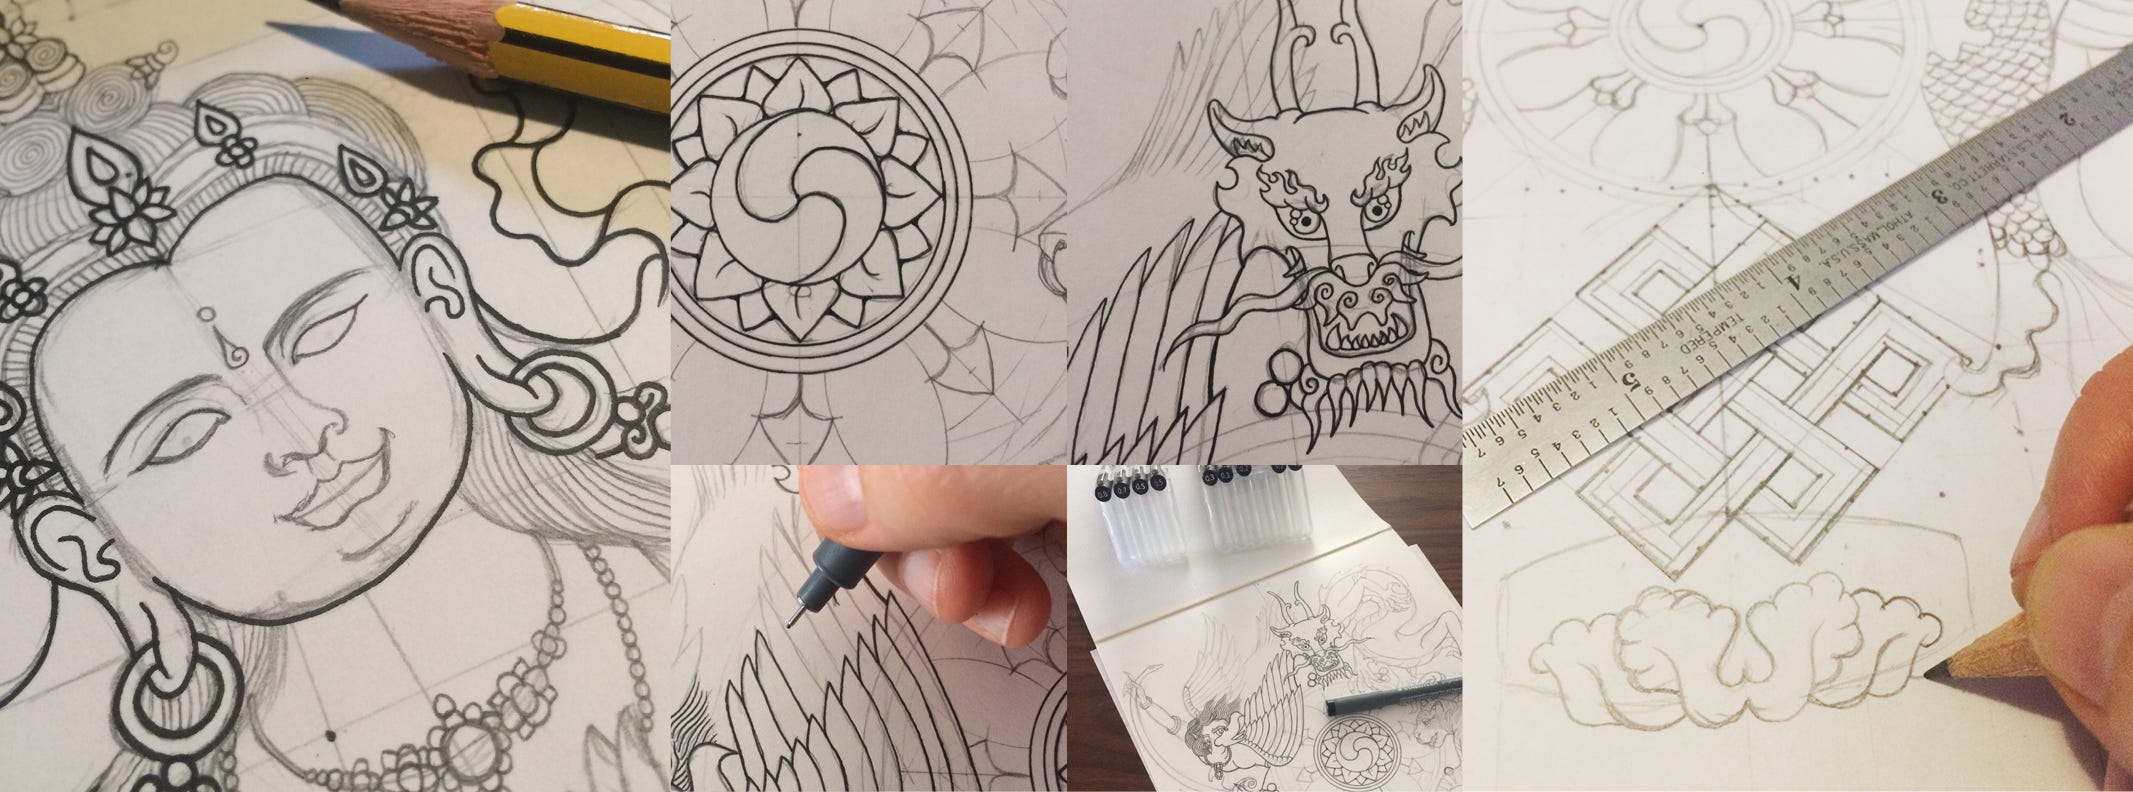 Photos of the progress of past Thangka Line Drawing pieces I have done. Left is the face of a standing Manjushi, partially in pencil, partially outlined in ink. Middle images are four different shots of an original concept depiction of the Four Dignities surrounding a dharma wheel. Up close detail shots of the middle of the wheel, the face of the dragon and the wing of the Garuda. To the right is a detail photo of the initial pencil drawing of the Eight Auspicious signs, close cut to the infinite knot and a lotus blossom in progress.